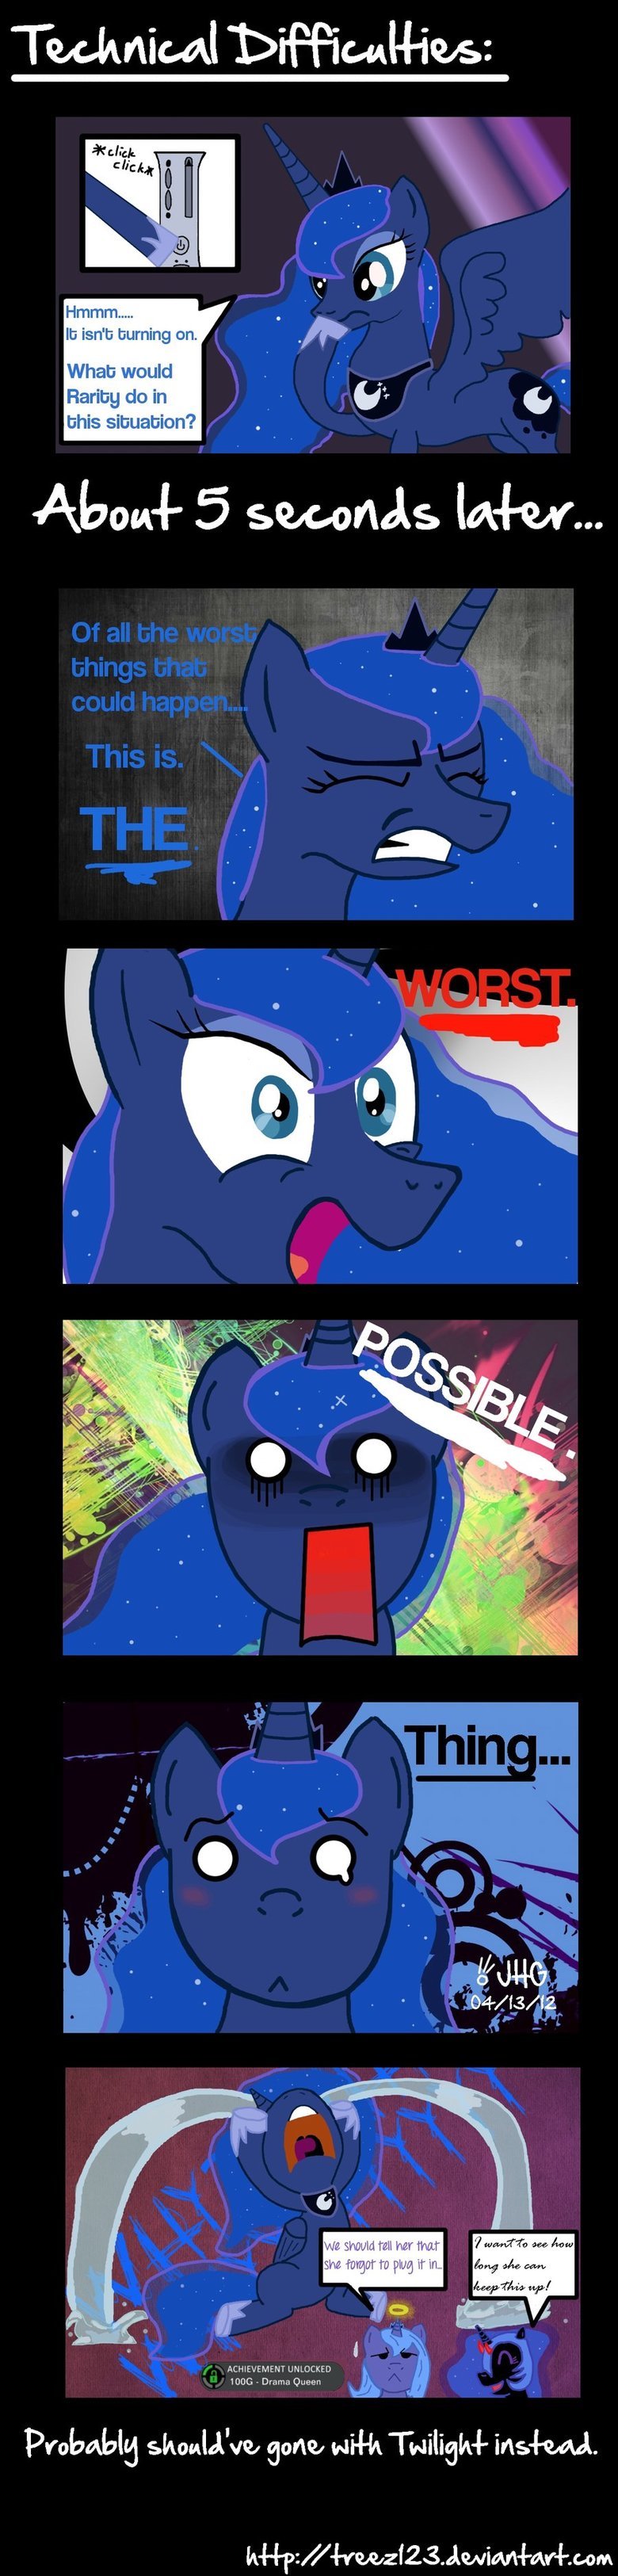 How we all react.. Even ponies act the same way we do when our computers don't work.. Technical t: ? : E isn' t burning on. What would Rarity do in this situati